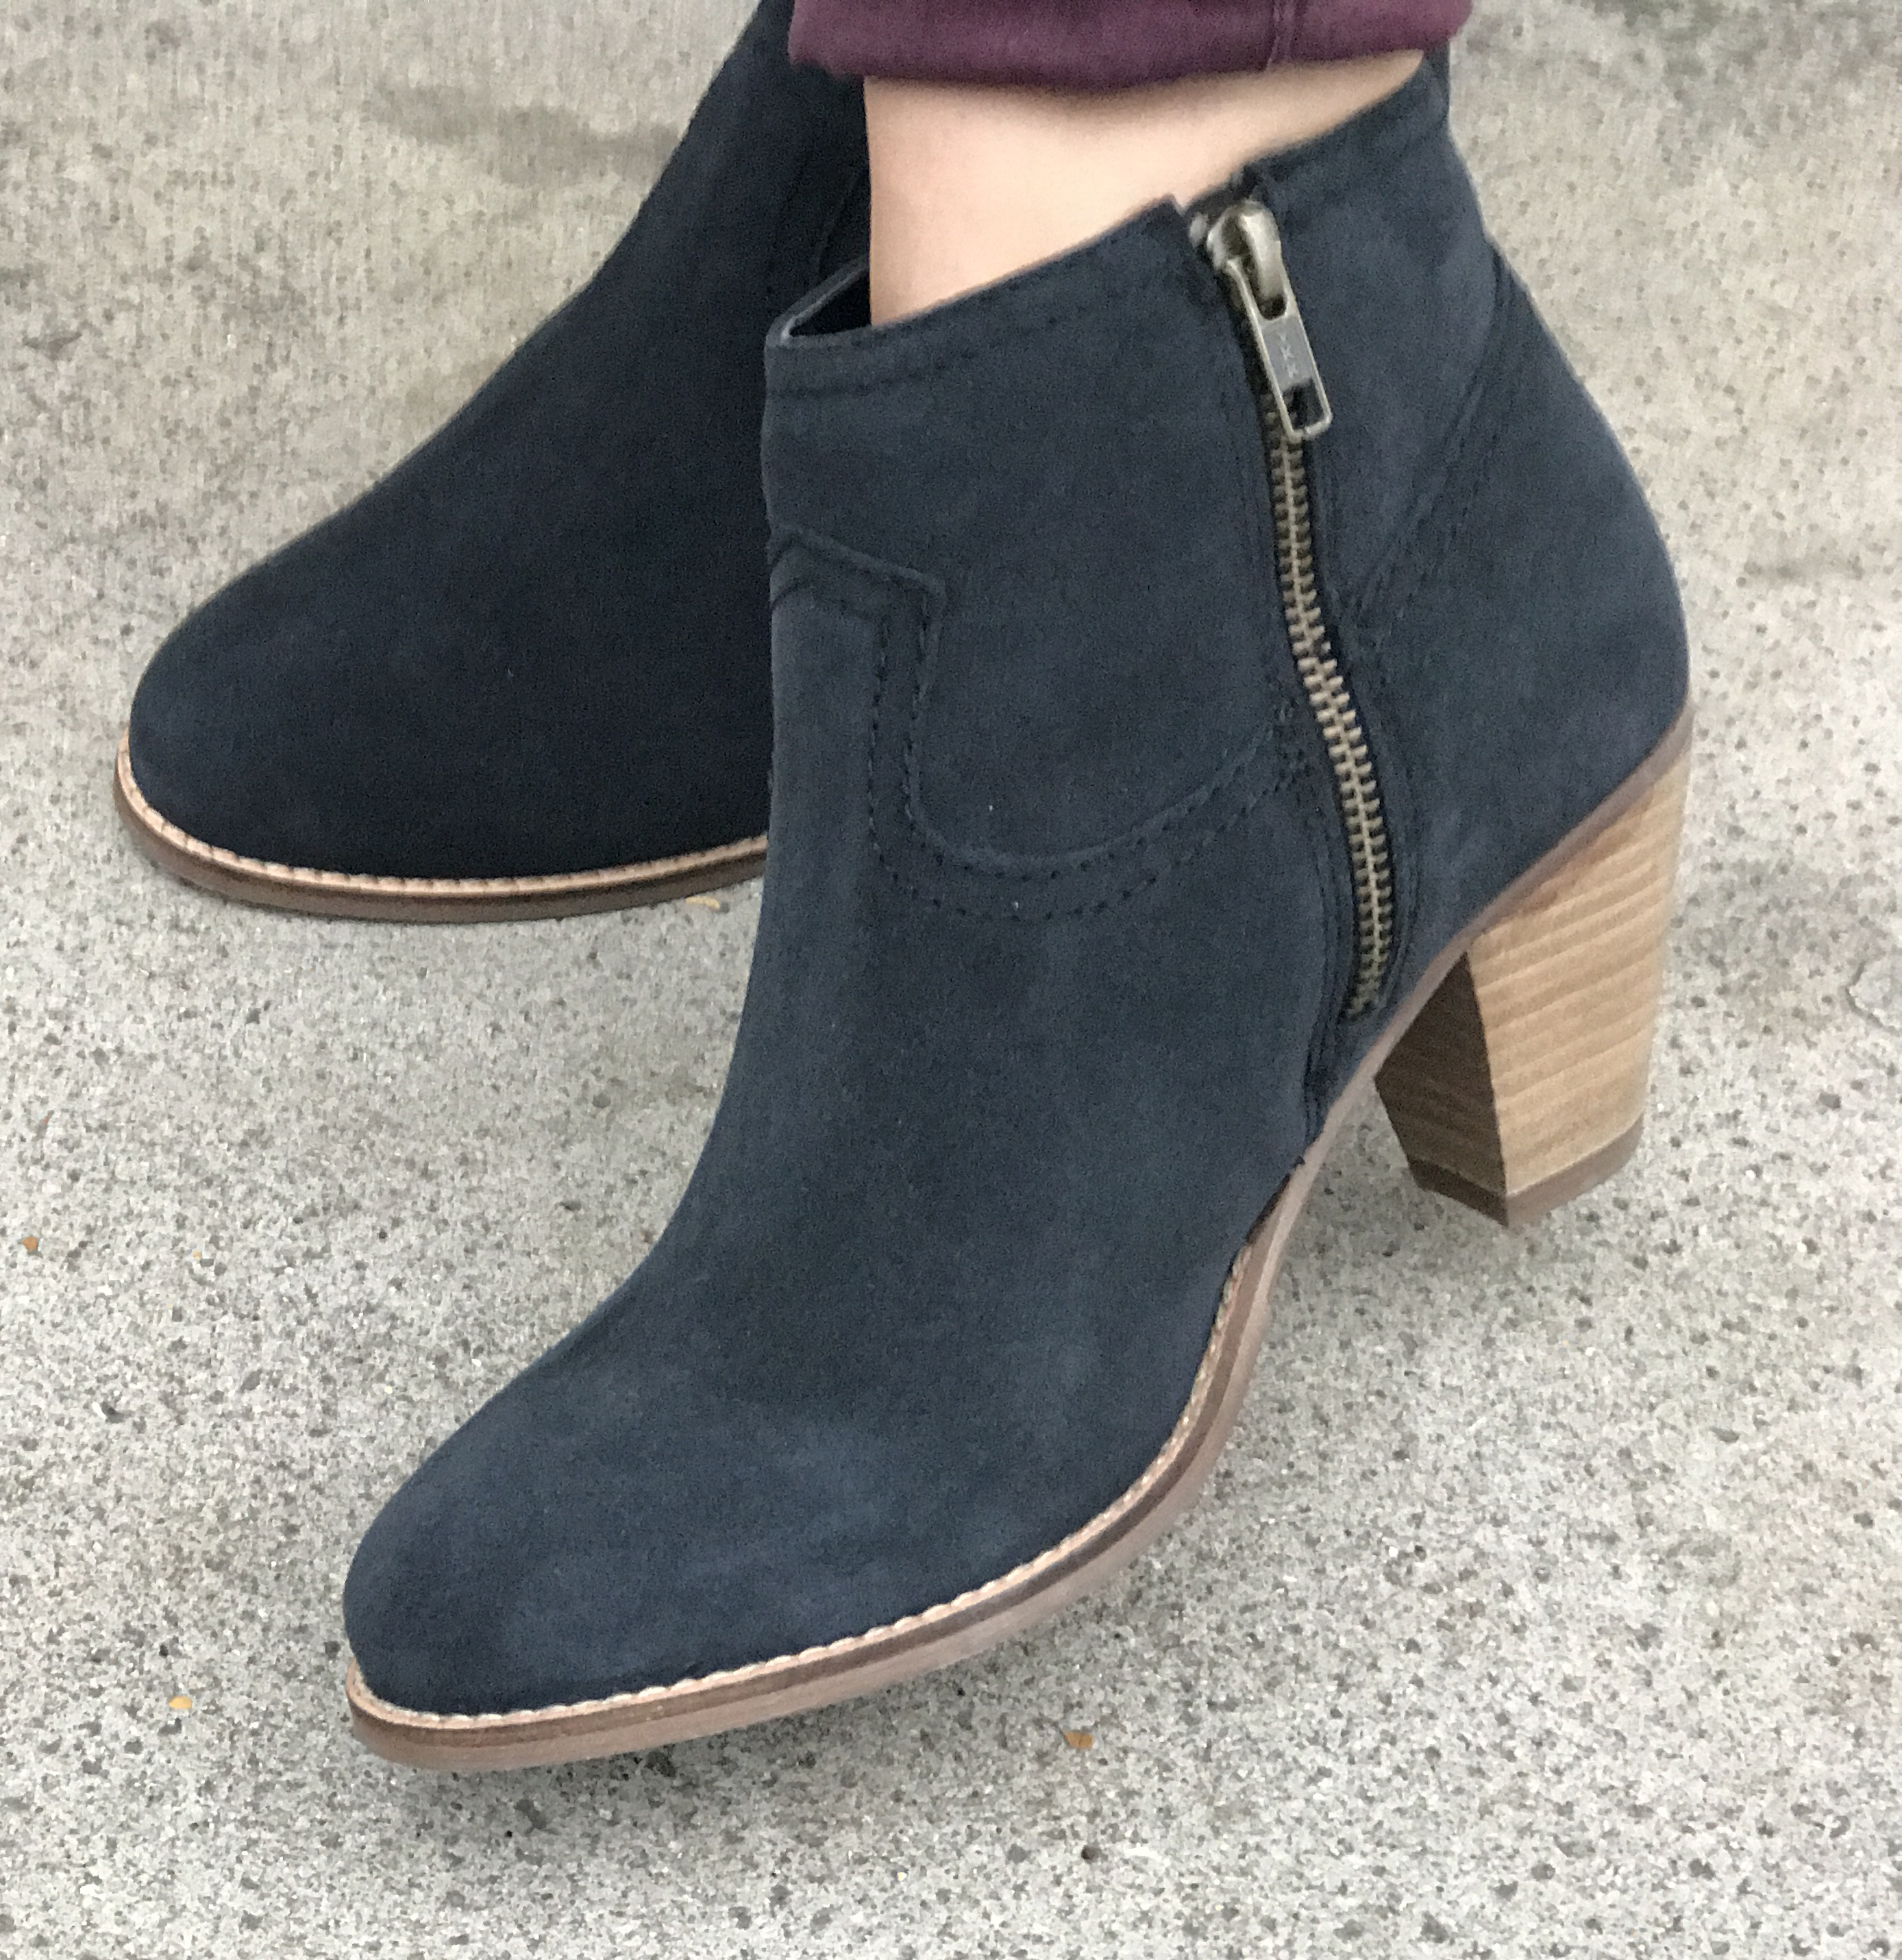 boots | house of fraser | cocomamastyle